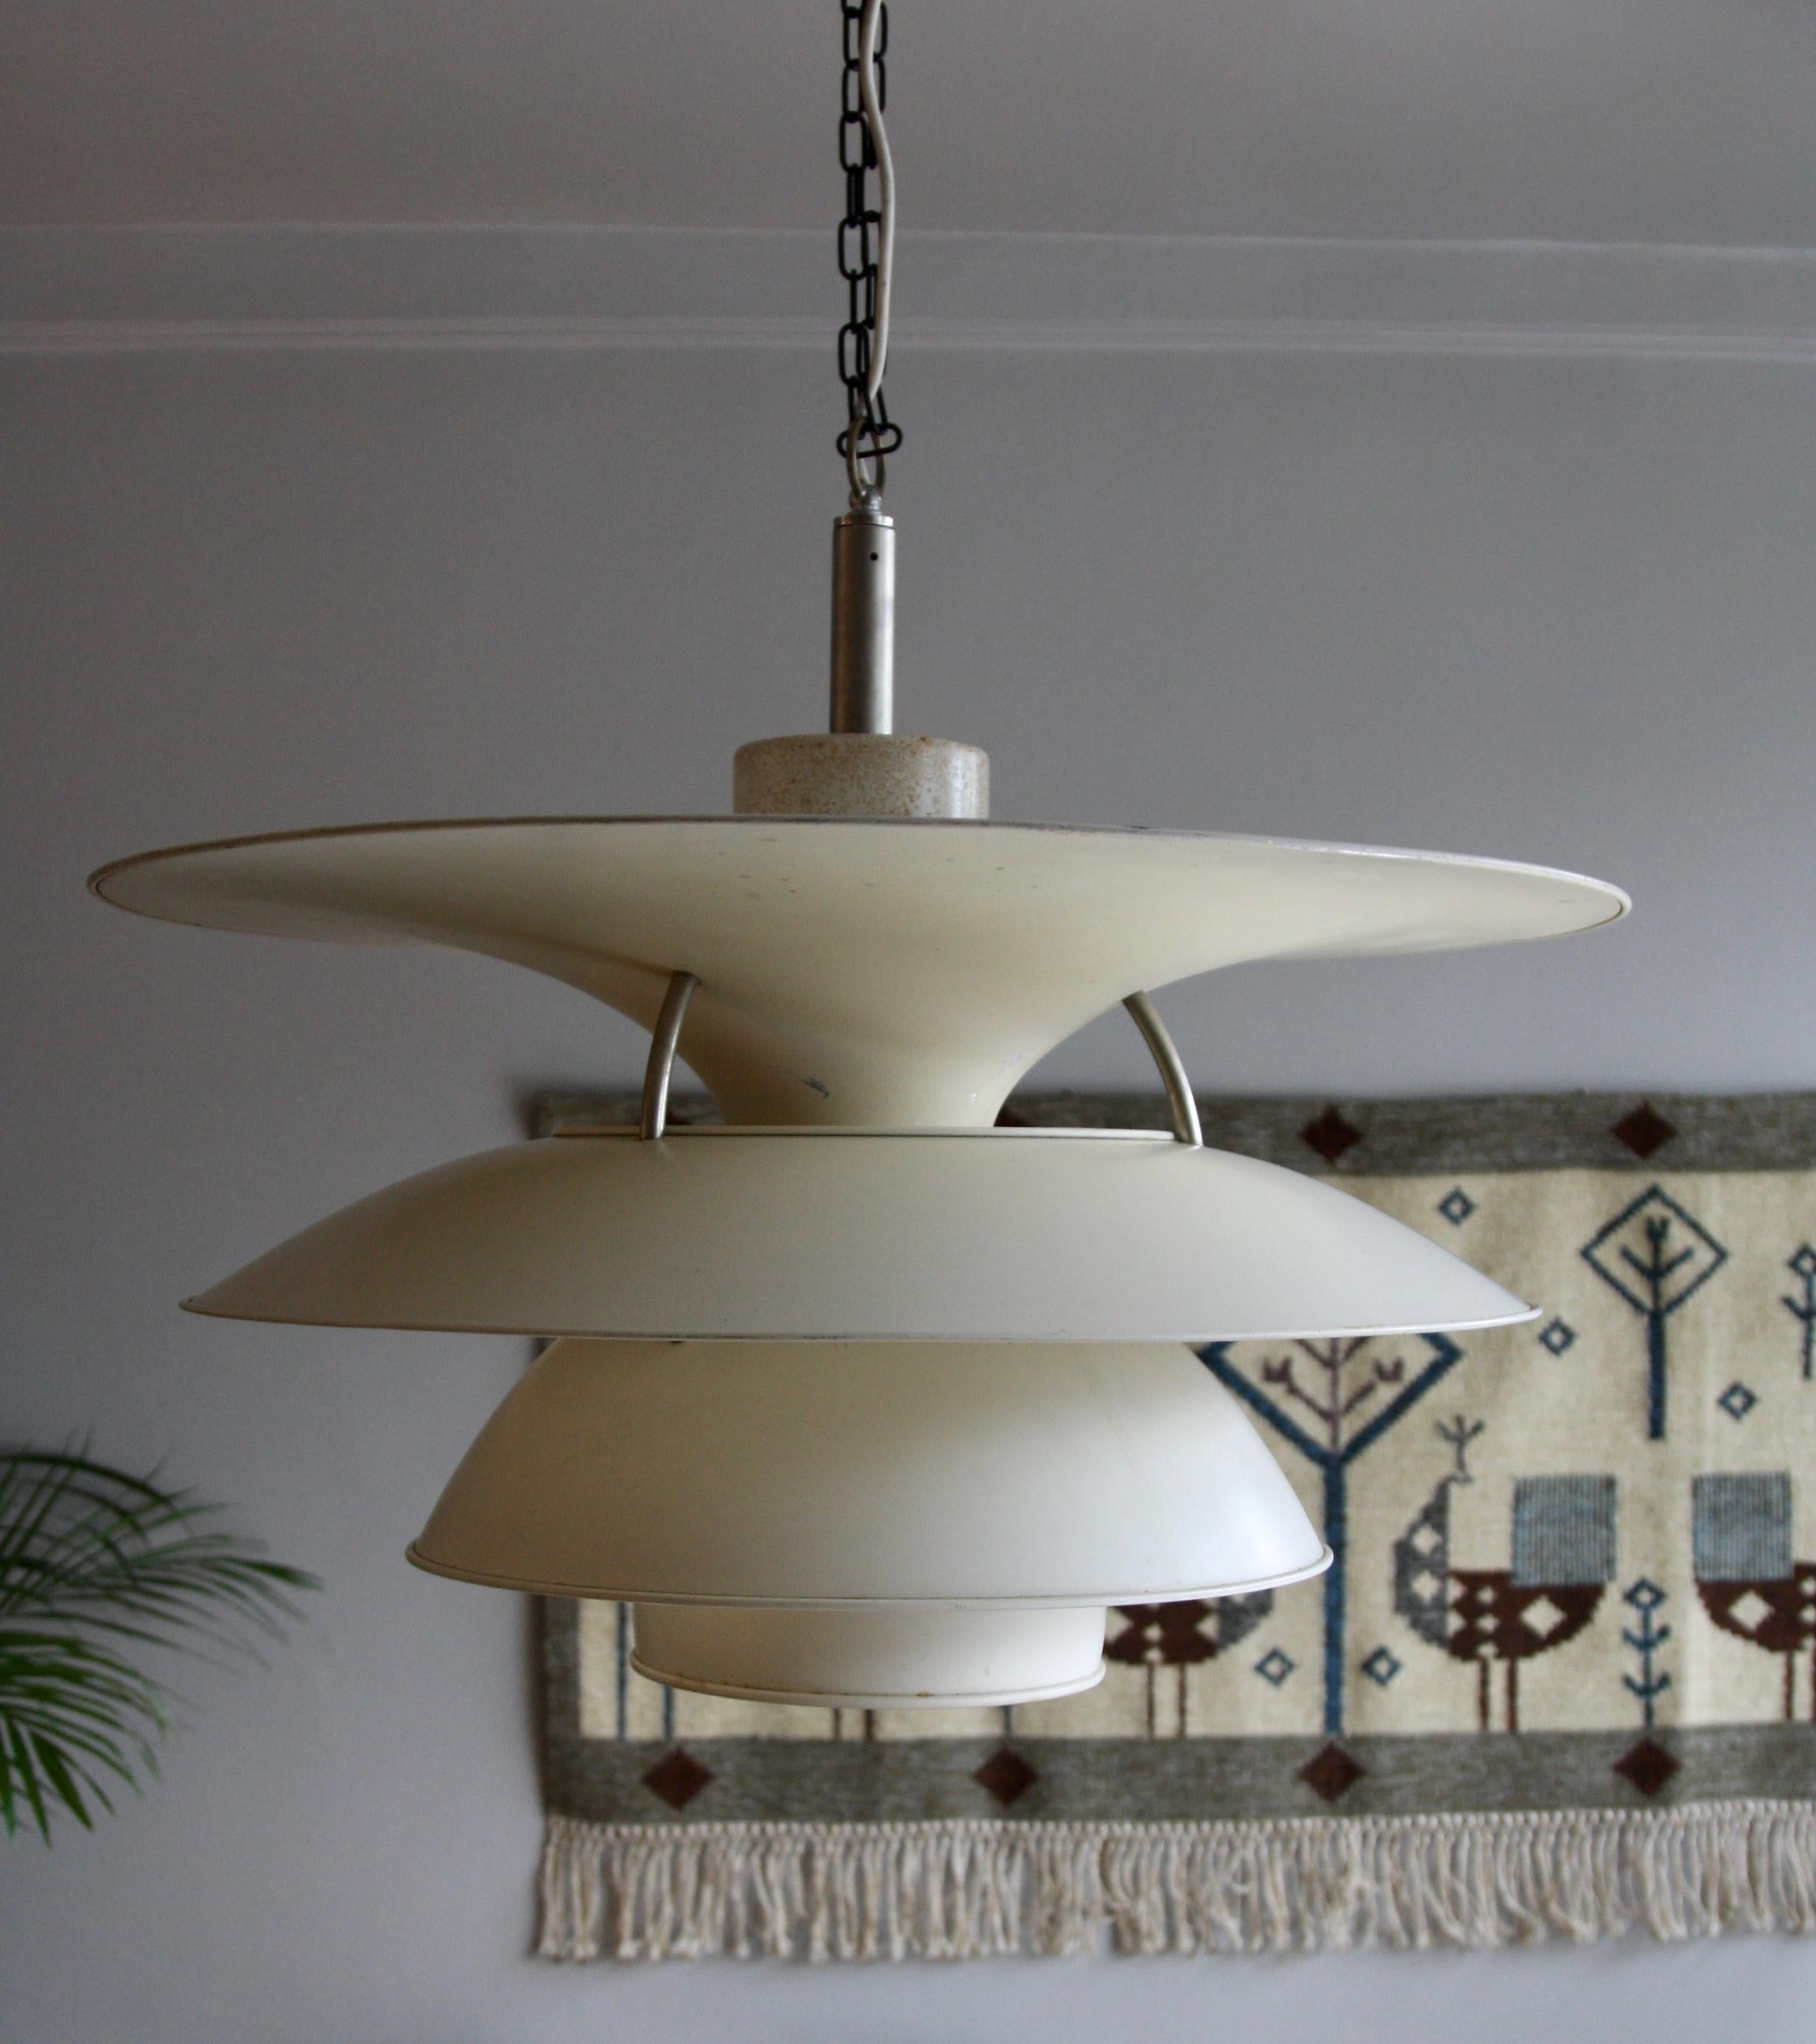 An enormous vintage PH chandelier designed in 1979 and made in the Early-1980s. 
Henningsen's original four-shade light was launched in 1931. This piece is an example of the redesigned four-shade light achieved by two Danish architects – Sophus